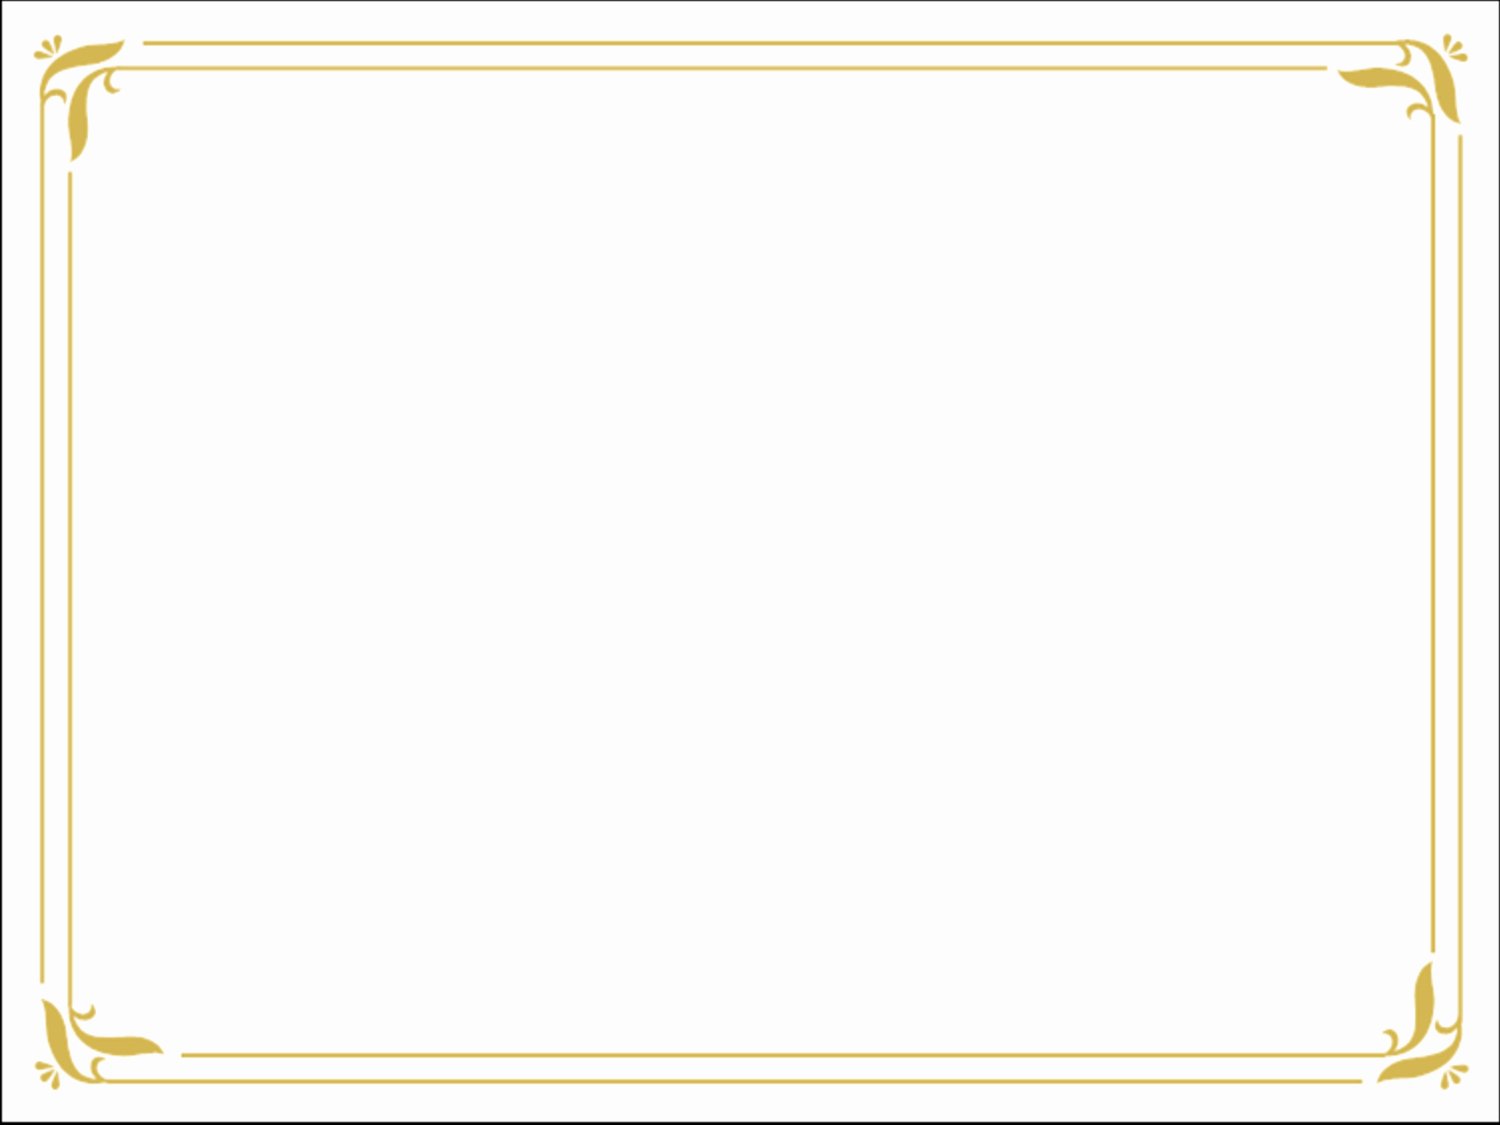 Free Gold Border Templates Luxury Simple Gold Certificate Border Slide Backgrounds